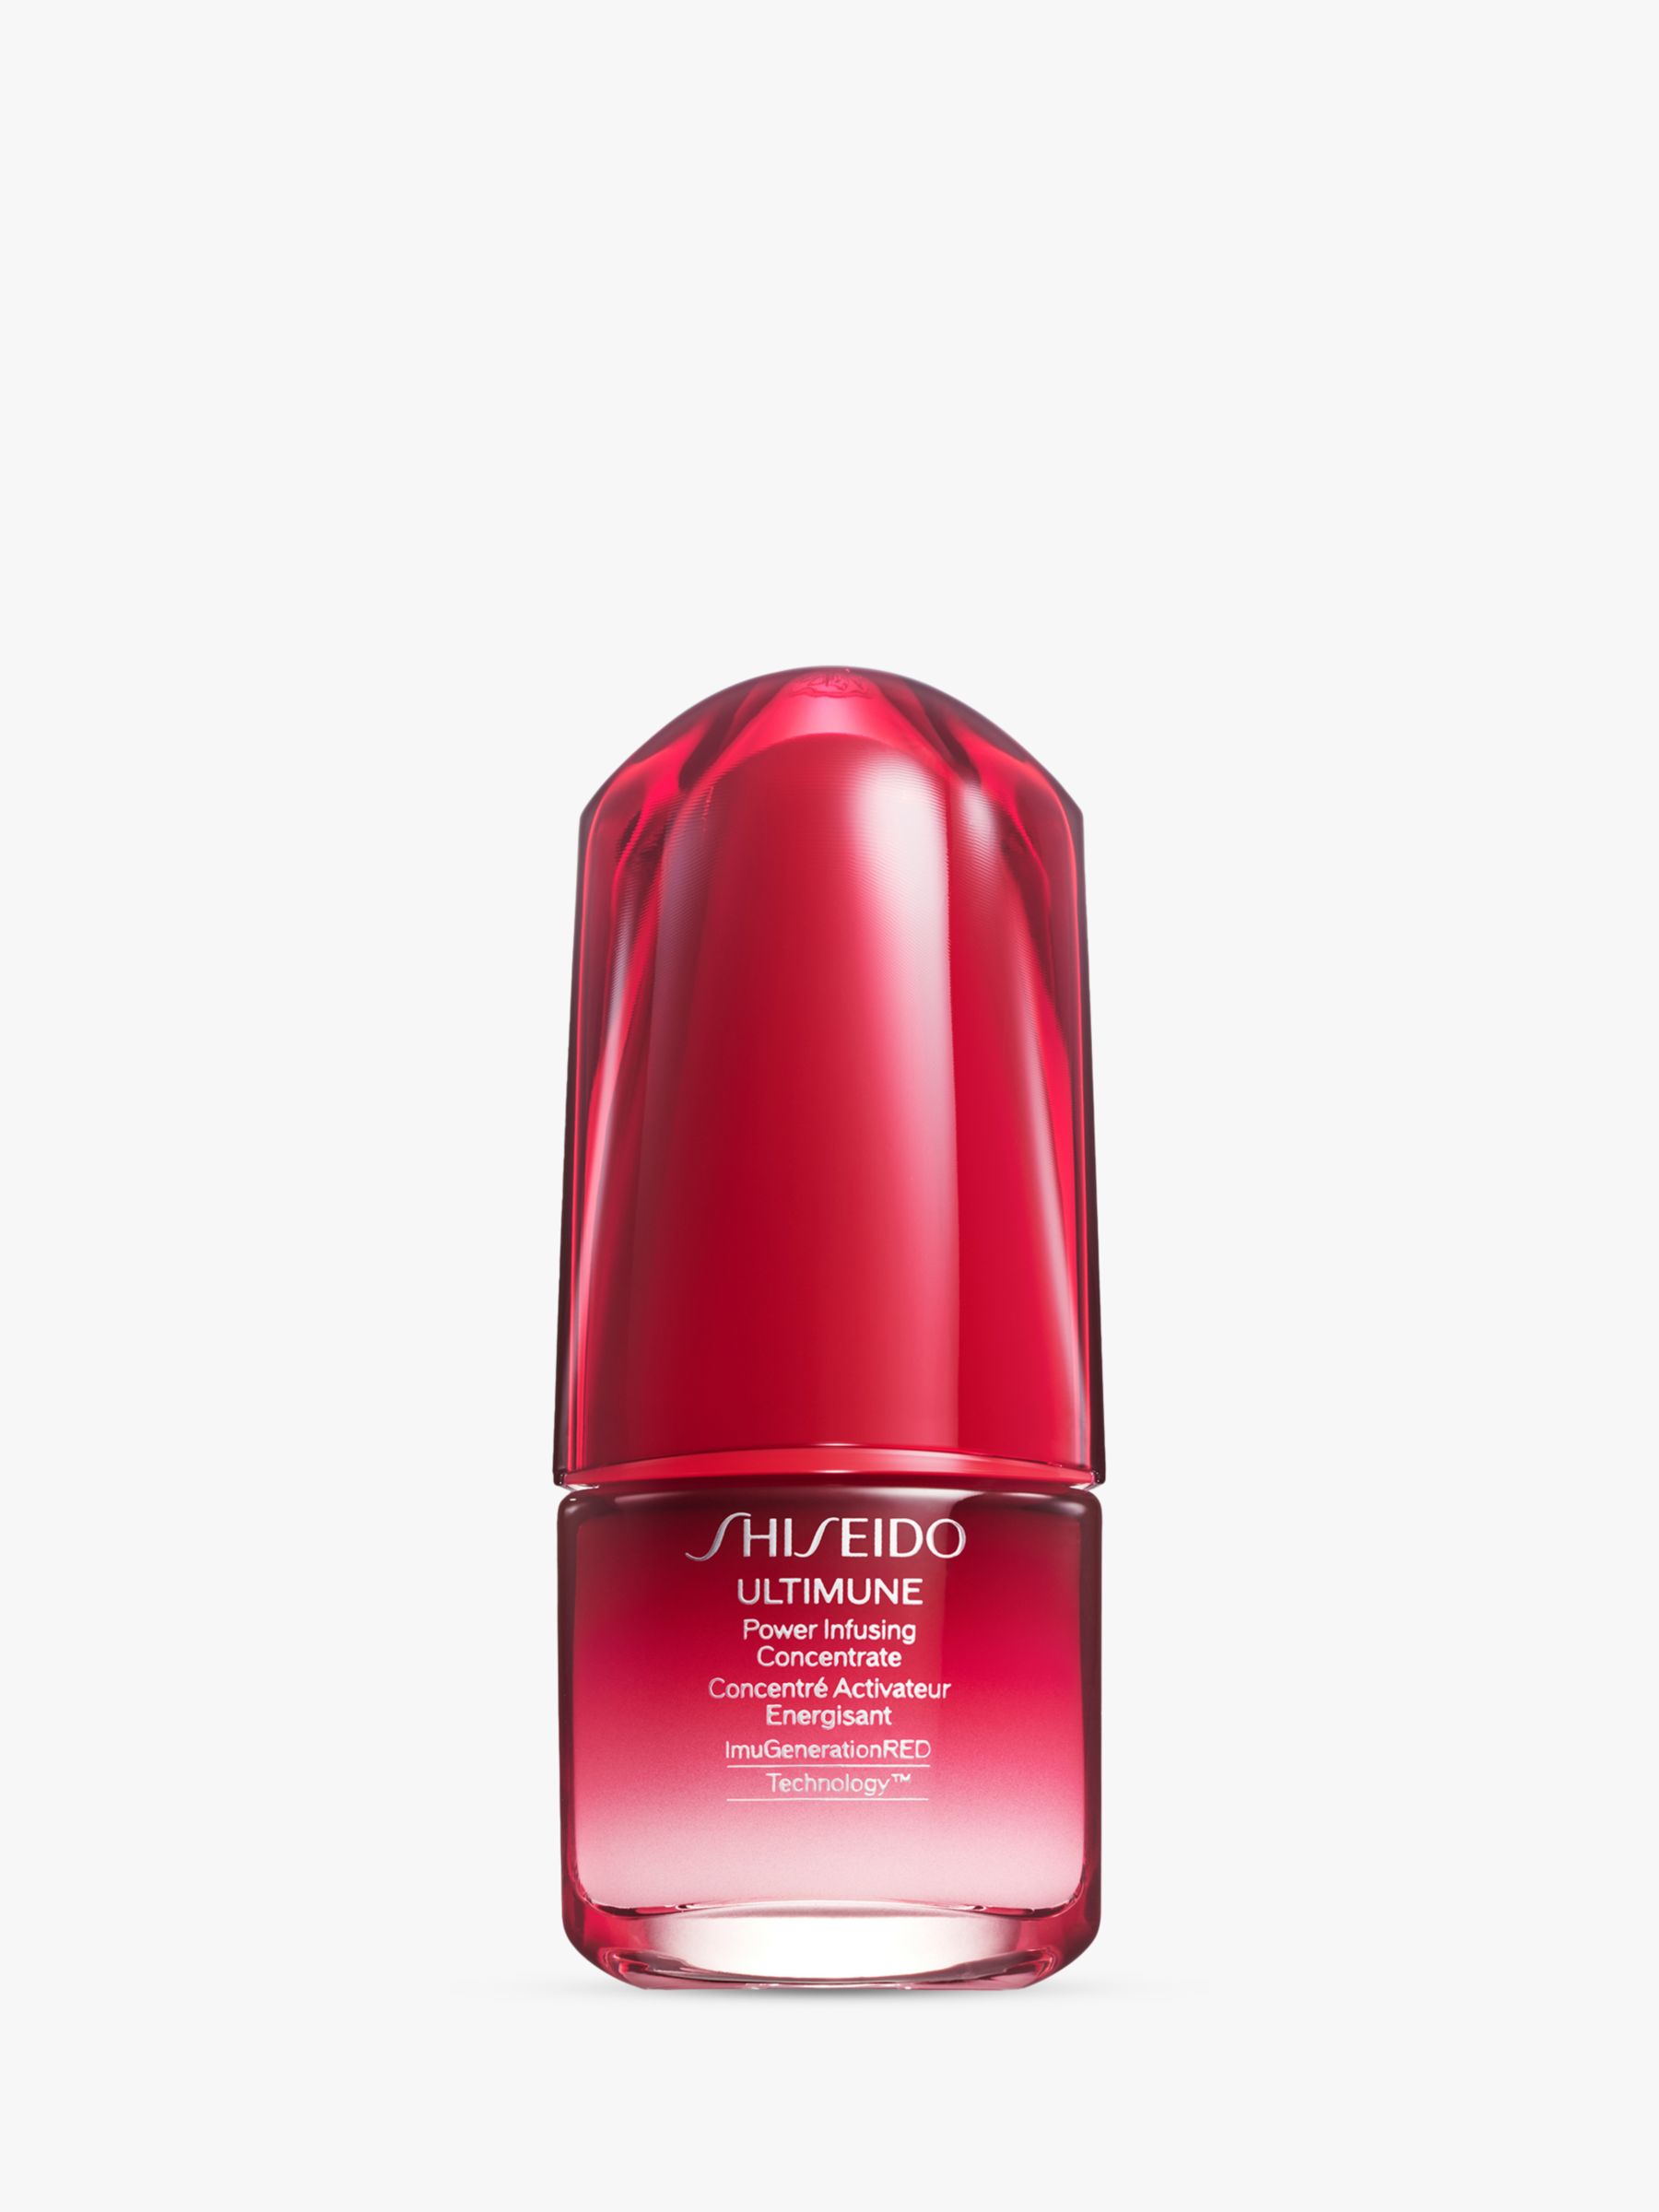 Shiseido Ultimune Power Infusing Concentrate, 15ml 1